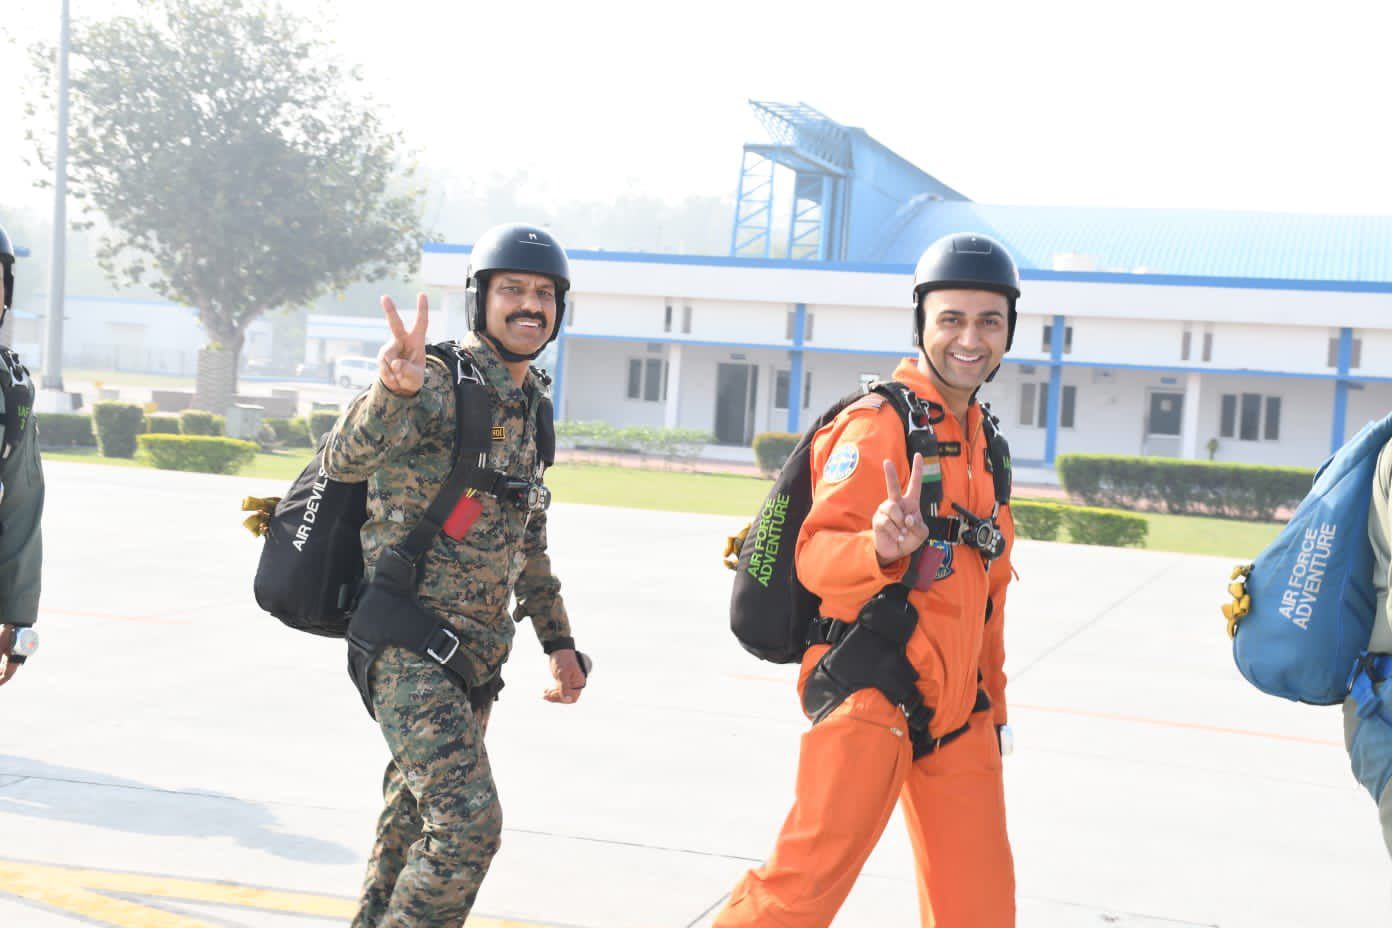 Hon'ble DGP Dr L. R. Bishnoi, IPS, created history with Five Successful Parajumps from 5000 Feet at Hindan Airbase, Setting New Records